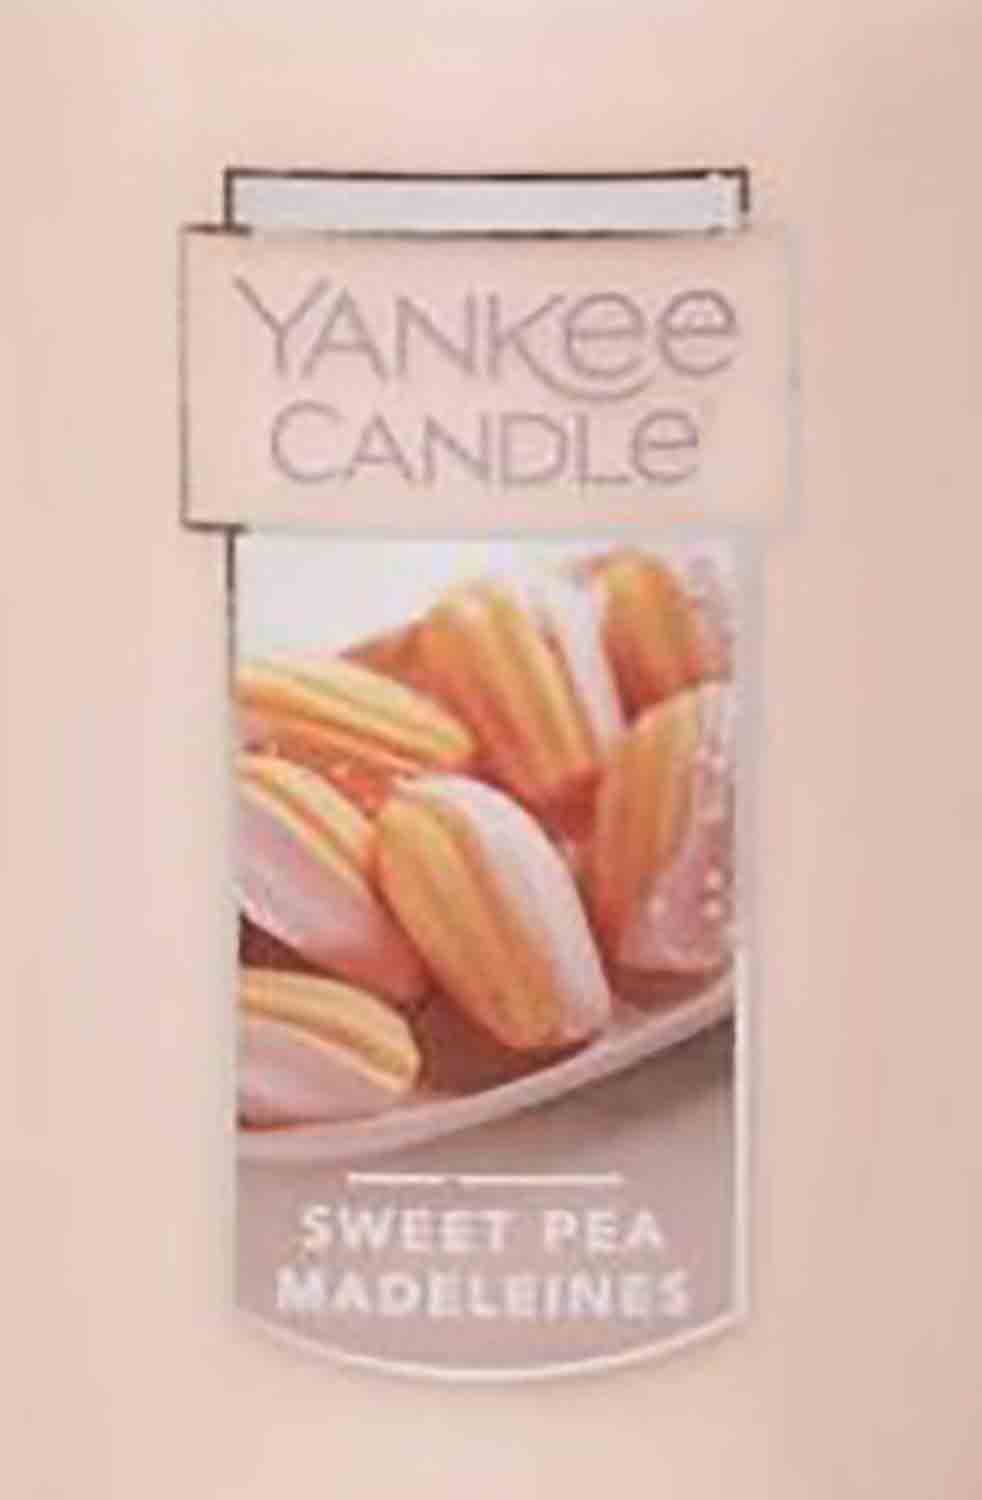 Yankee Candle Sweet Pea Madeleines USA 22g - Crumble vosk